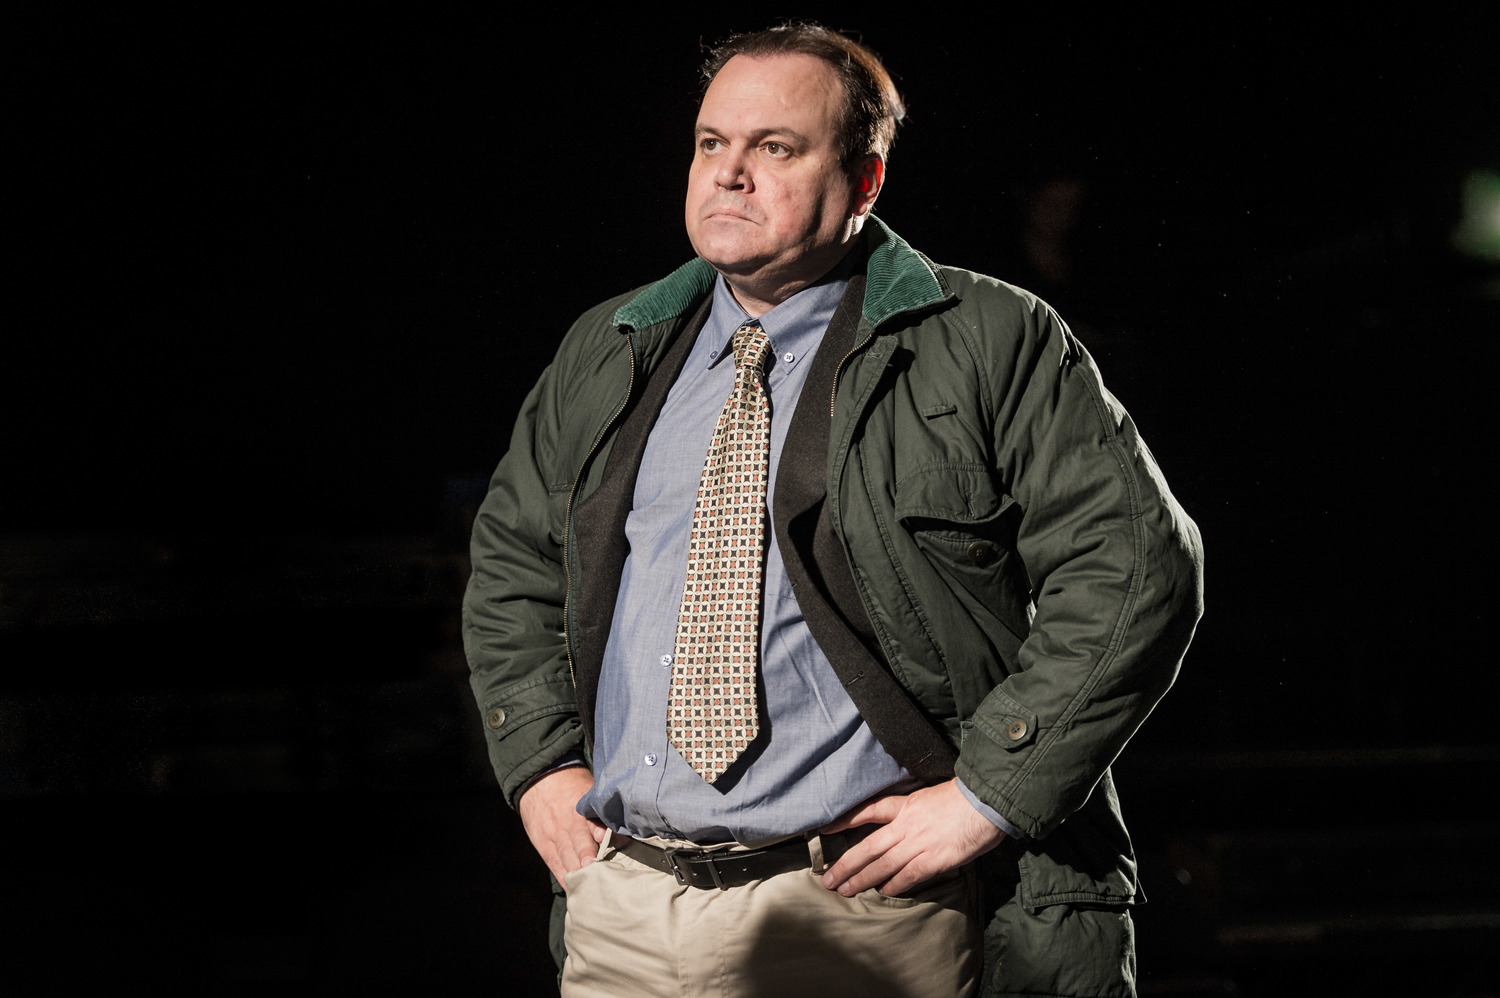 Shaun Williamson in Farragut North, Southwark Playhouse Off West End, composer - Jude Obermüller (photo by Robert Workman)